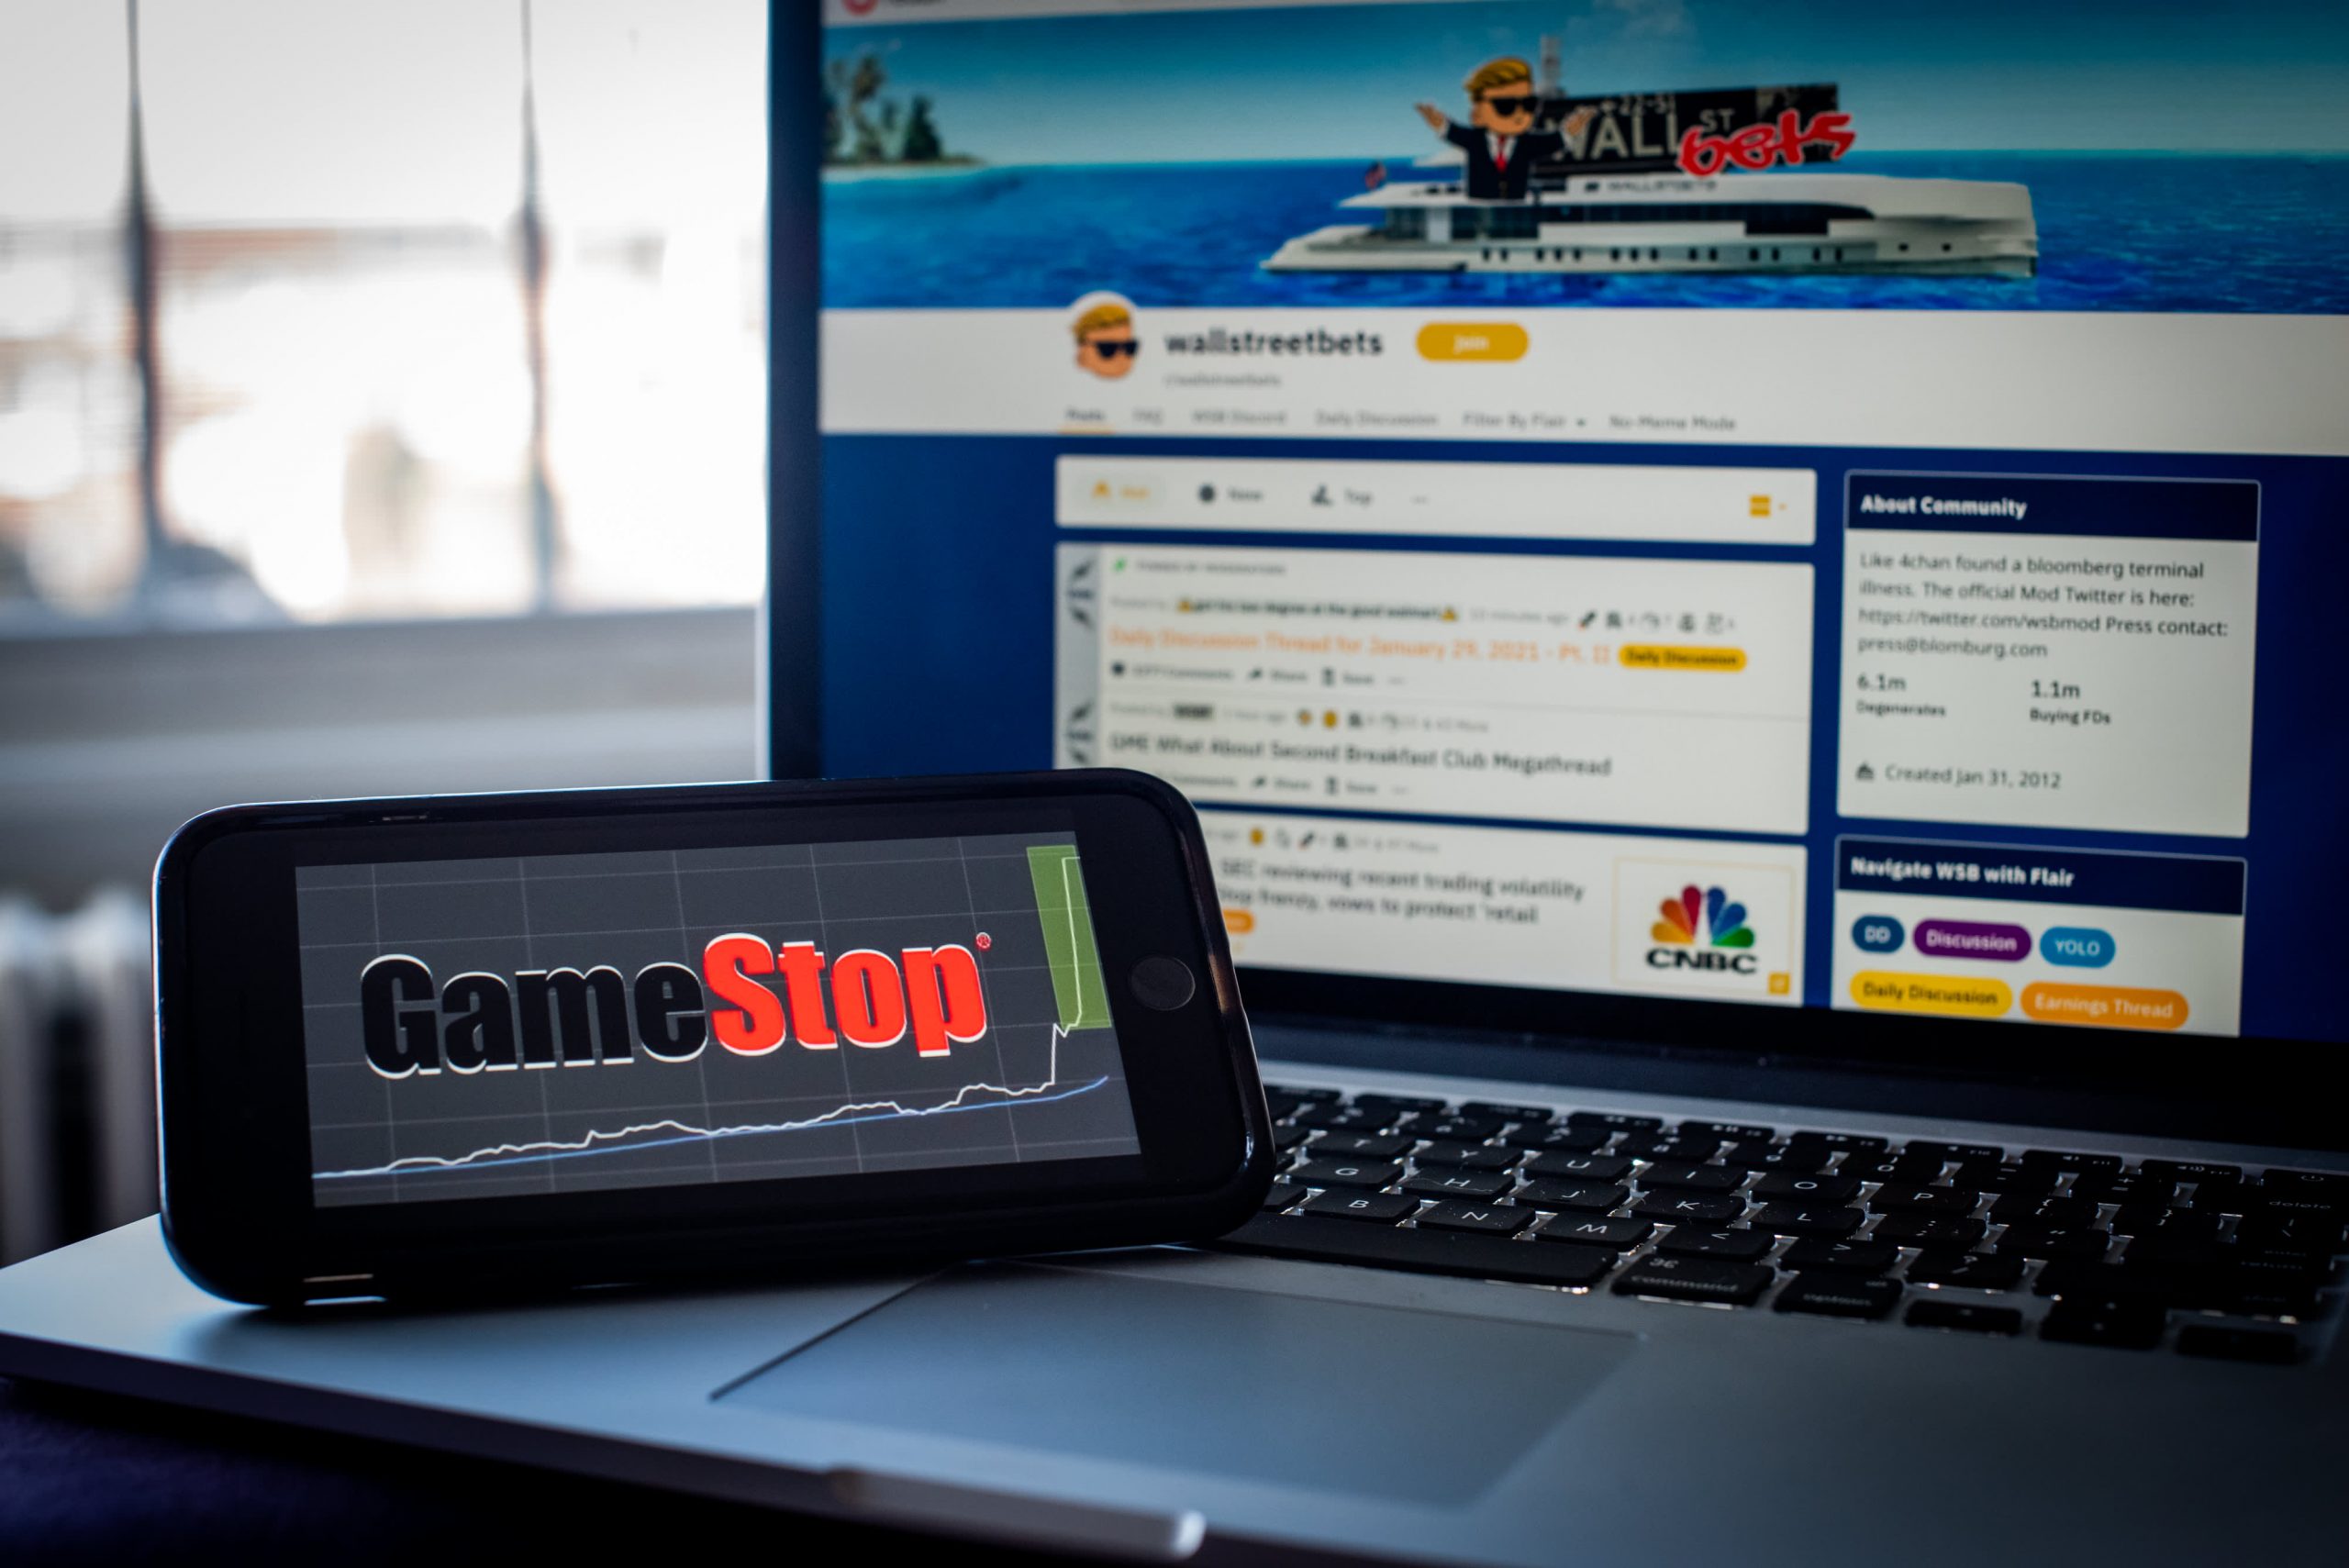 GameStop shares fall after climbing as a lot as 18% in premarket as volatility continues in February